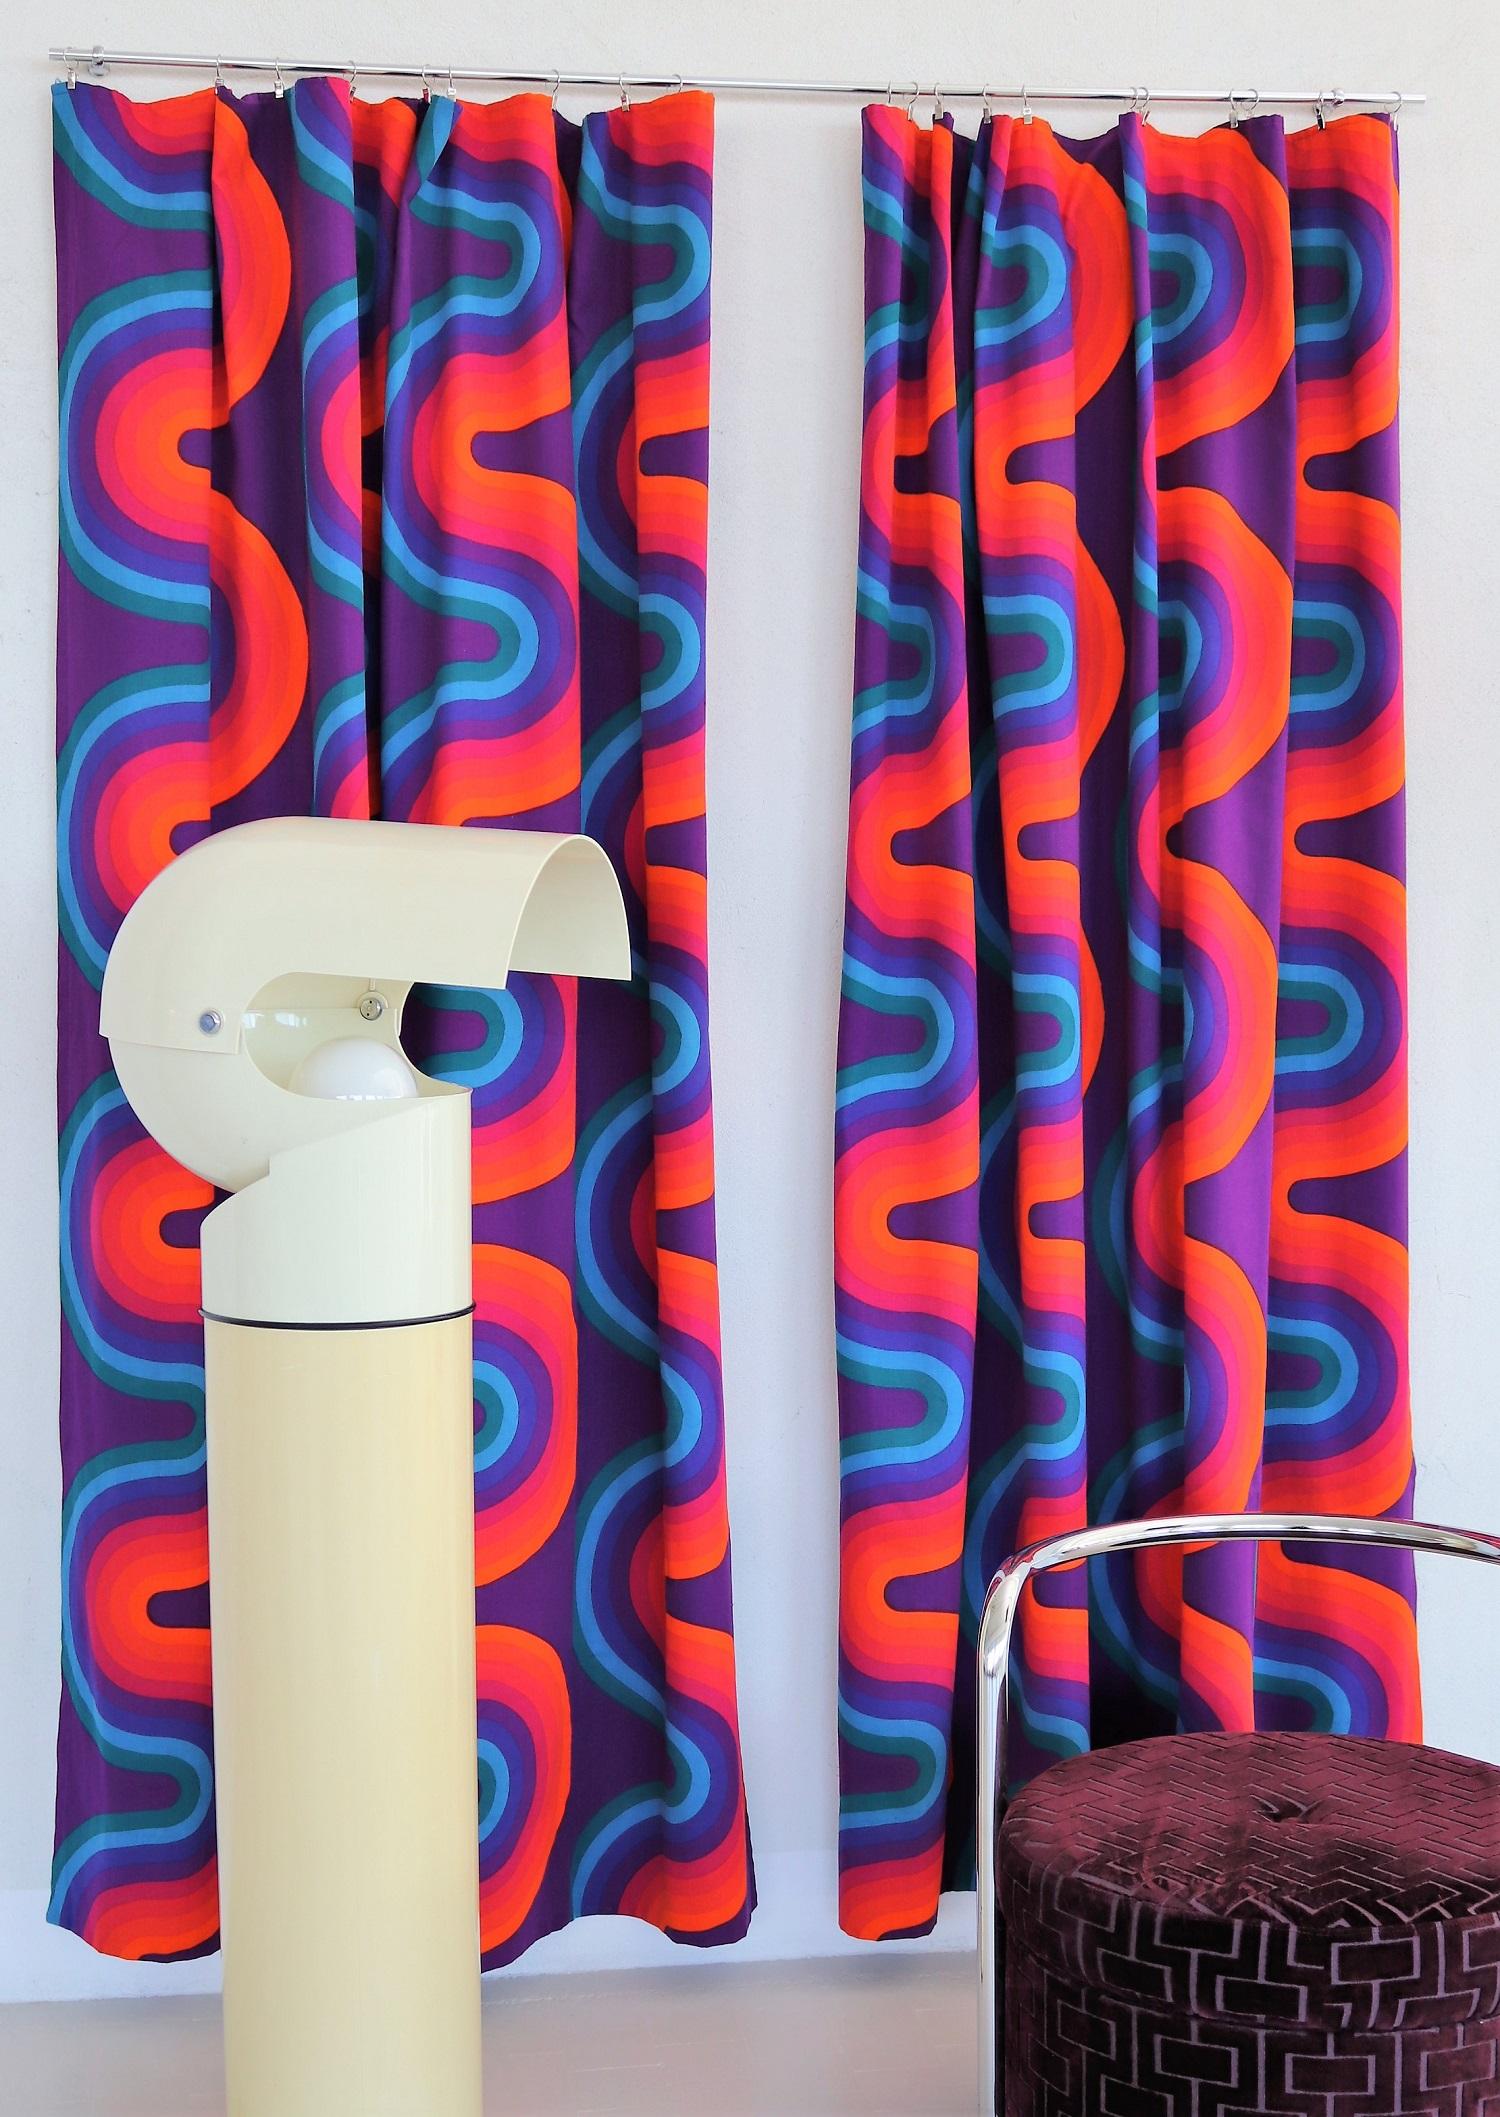 Powerful pair of original curtain panels designed by Verner Panton during, 1969-1971.
100% cotton material, Art. Vitra 139-2.
Printed with 8 pure colors: orange, bright red, dark red, aubergine, mauve, violet, blue and turquoise.
Inside printed with